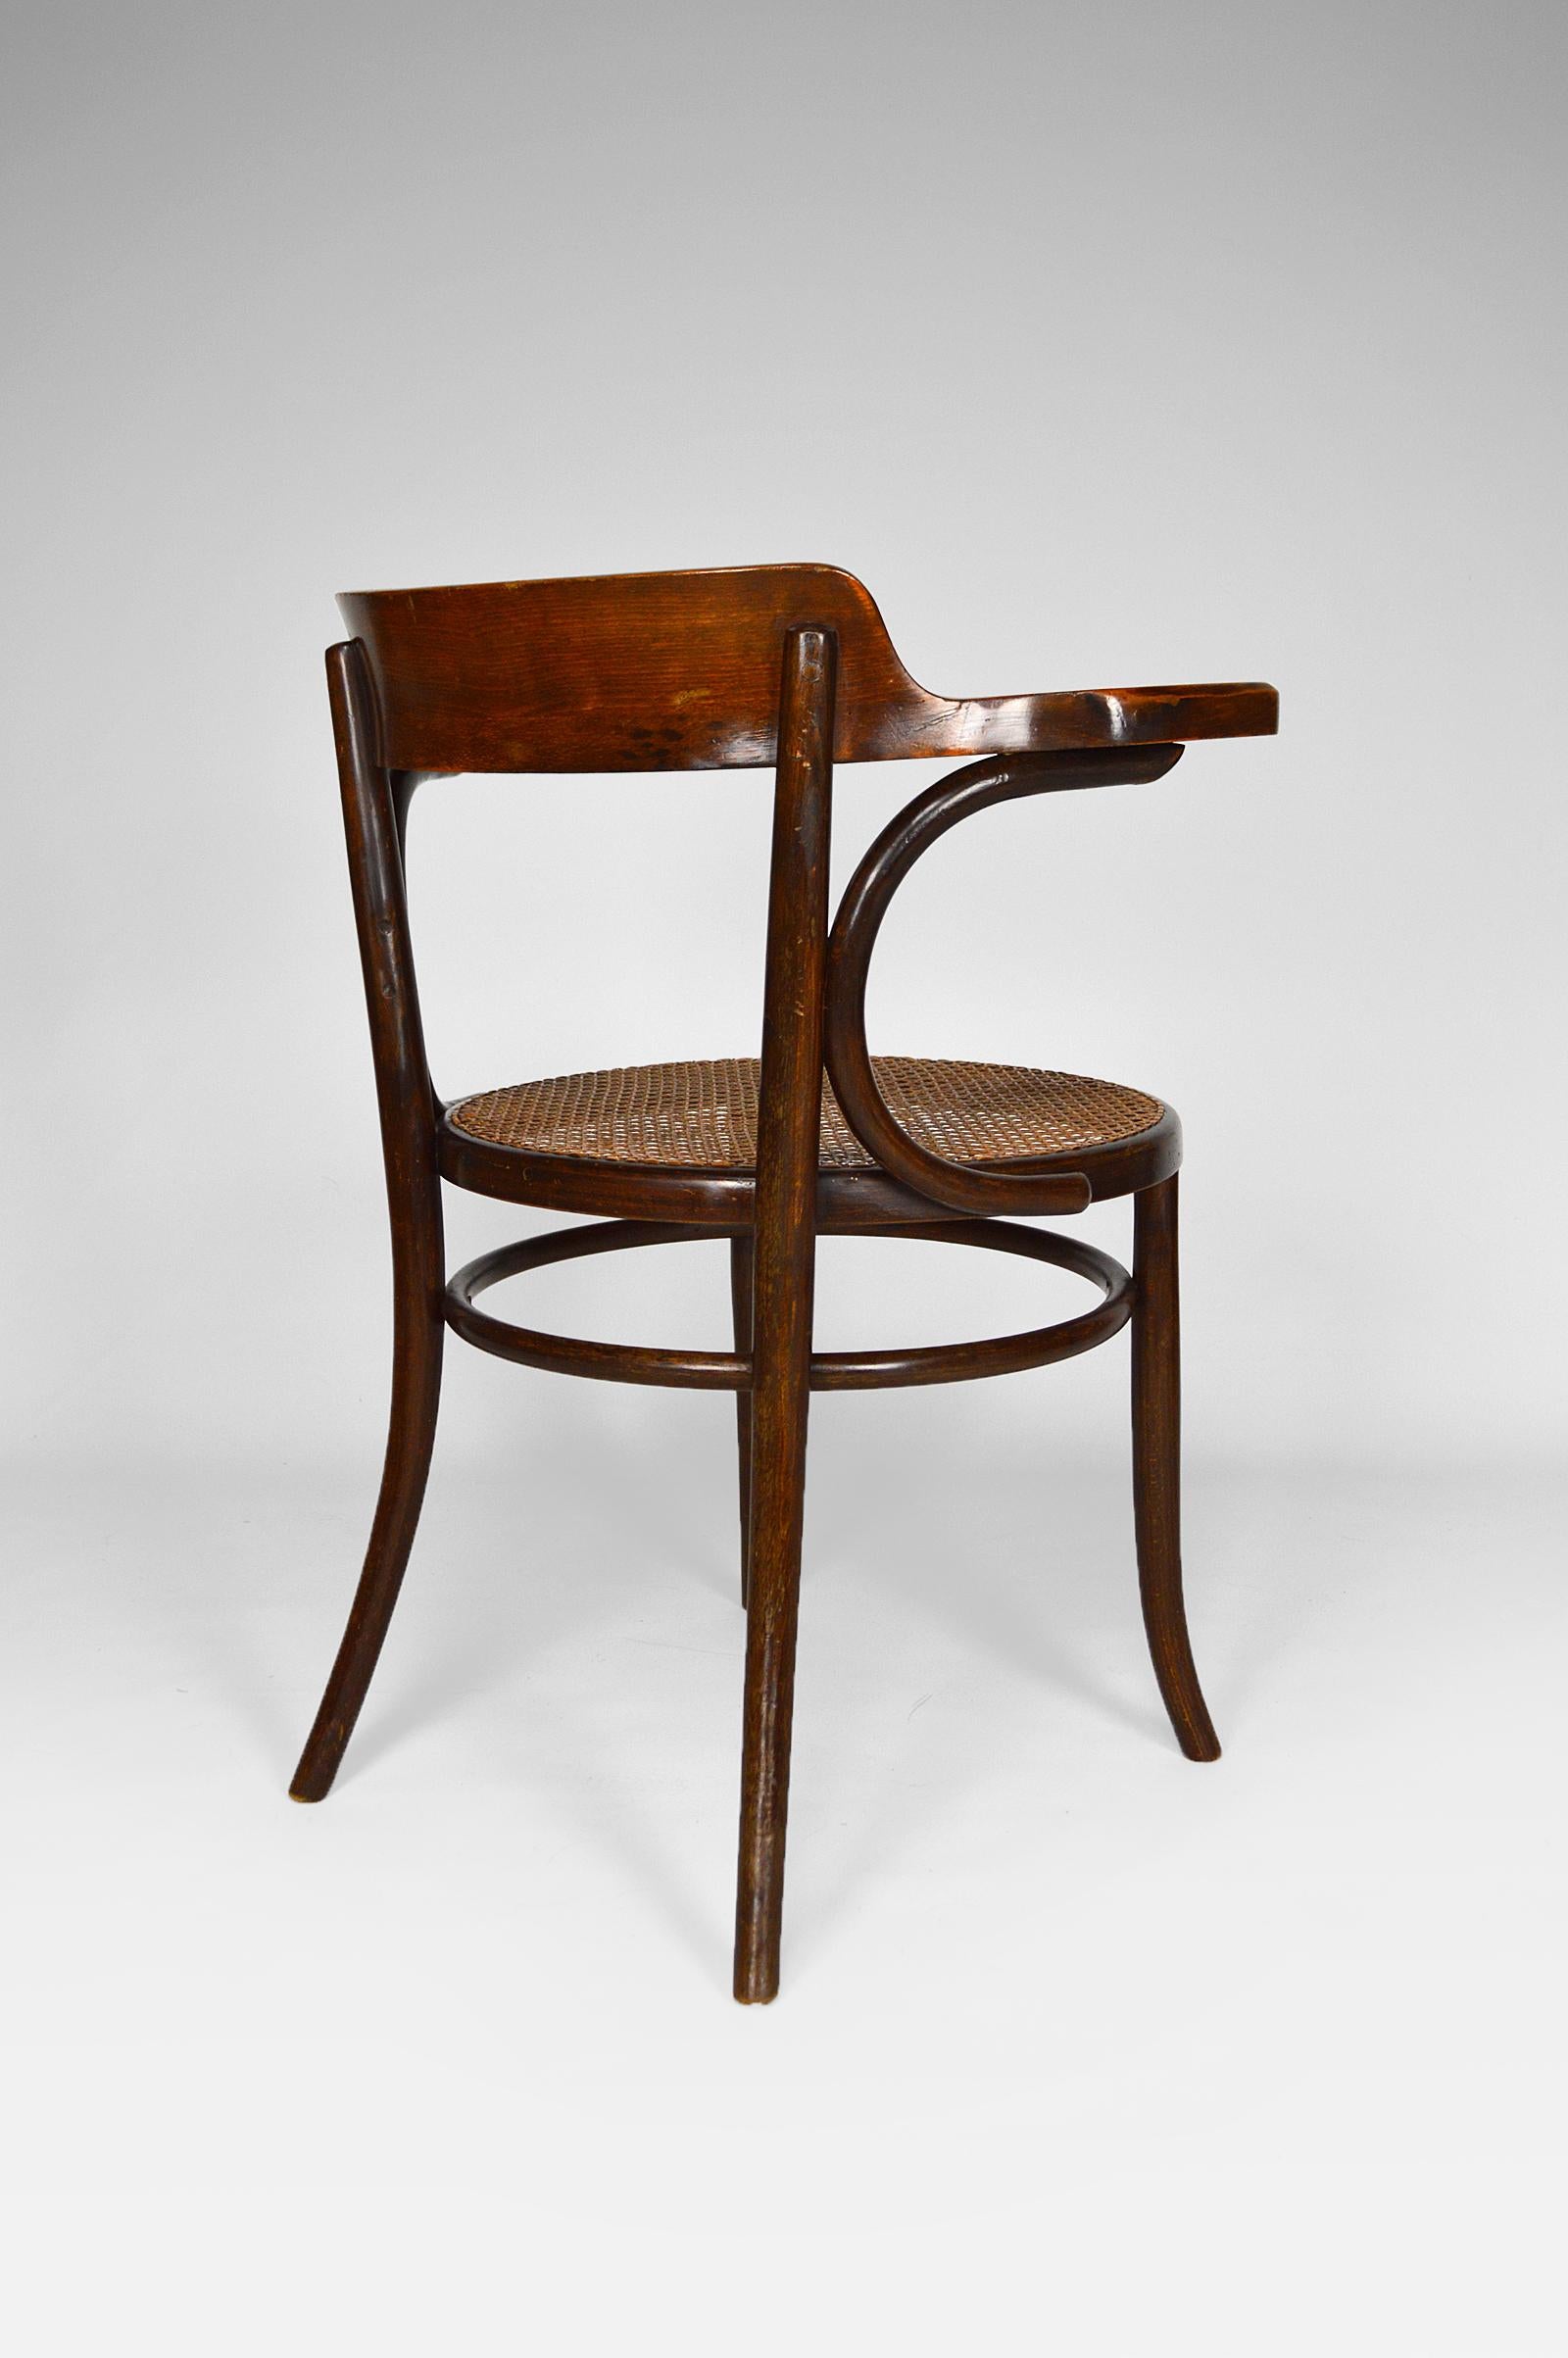 Early 20th Century Art Nouveau Bentwood Desk Armchair by Fischel, circa 1900 For Sale